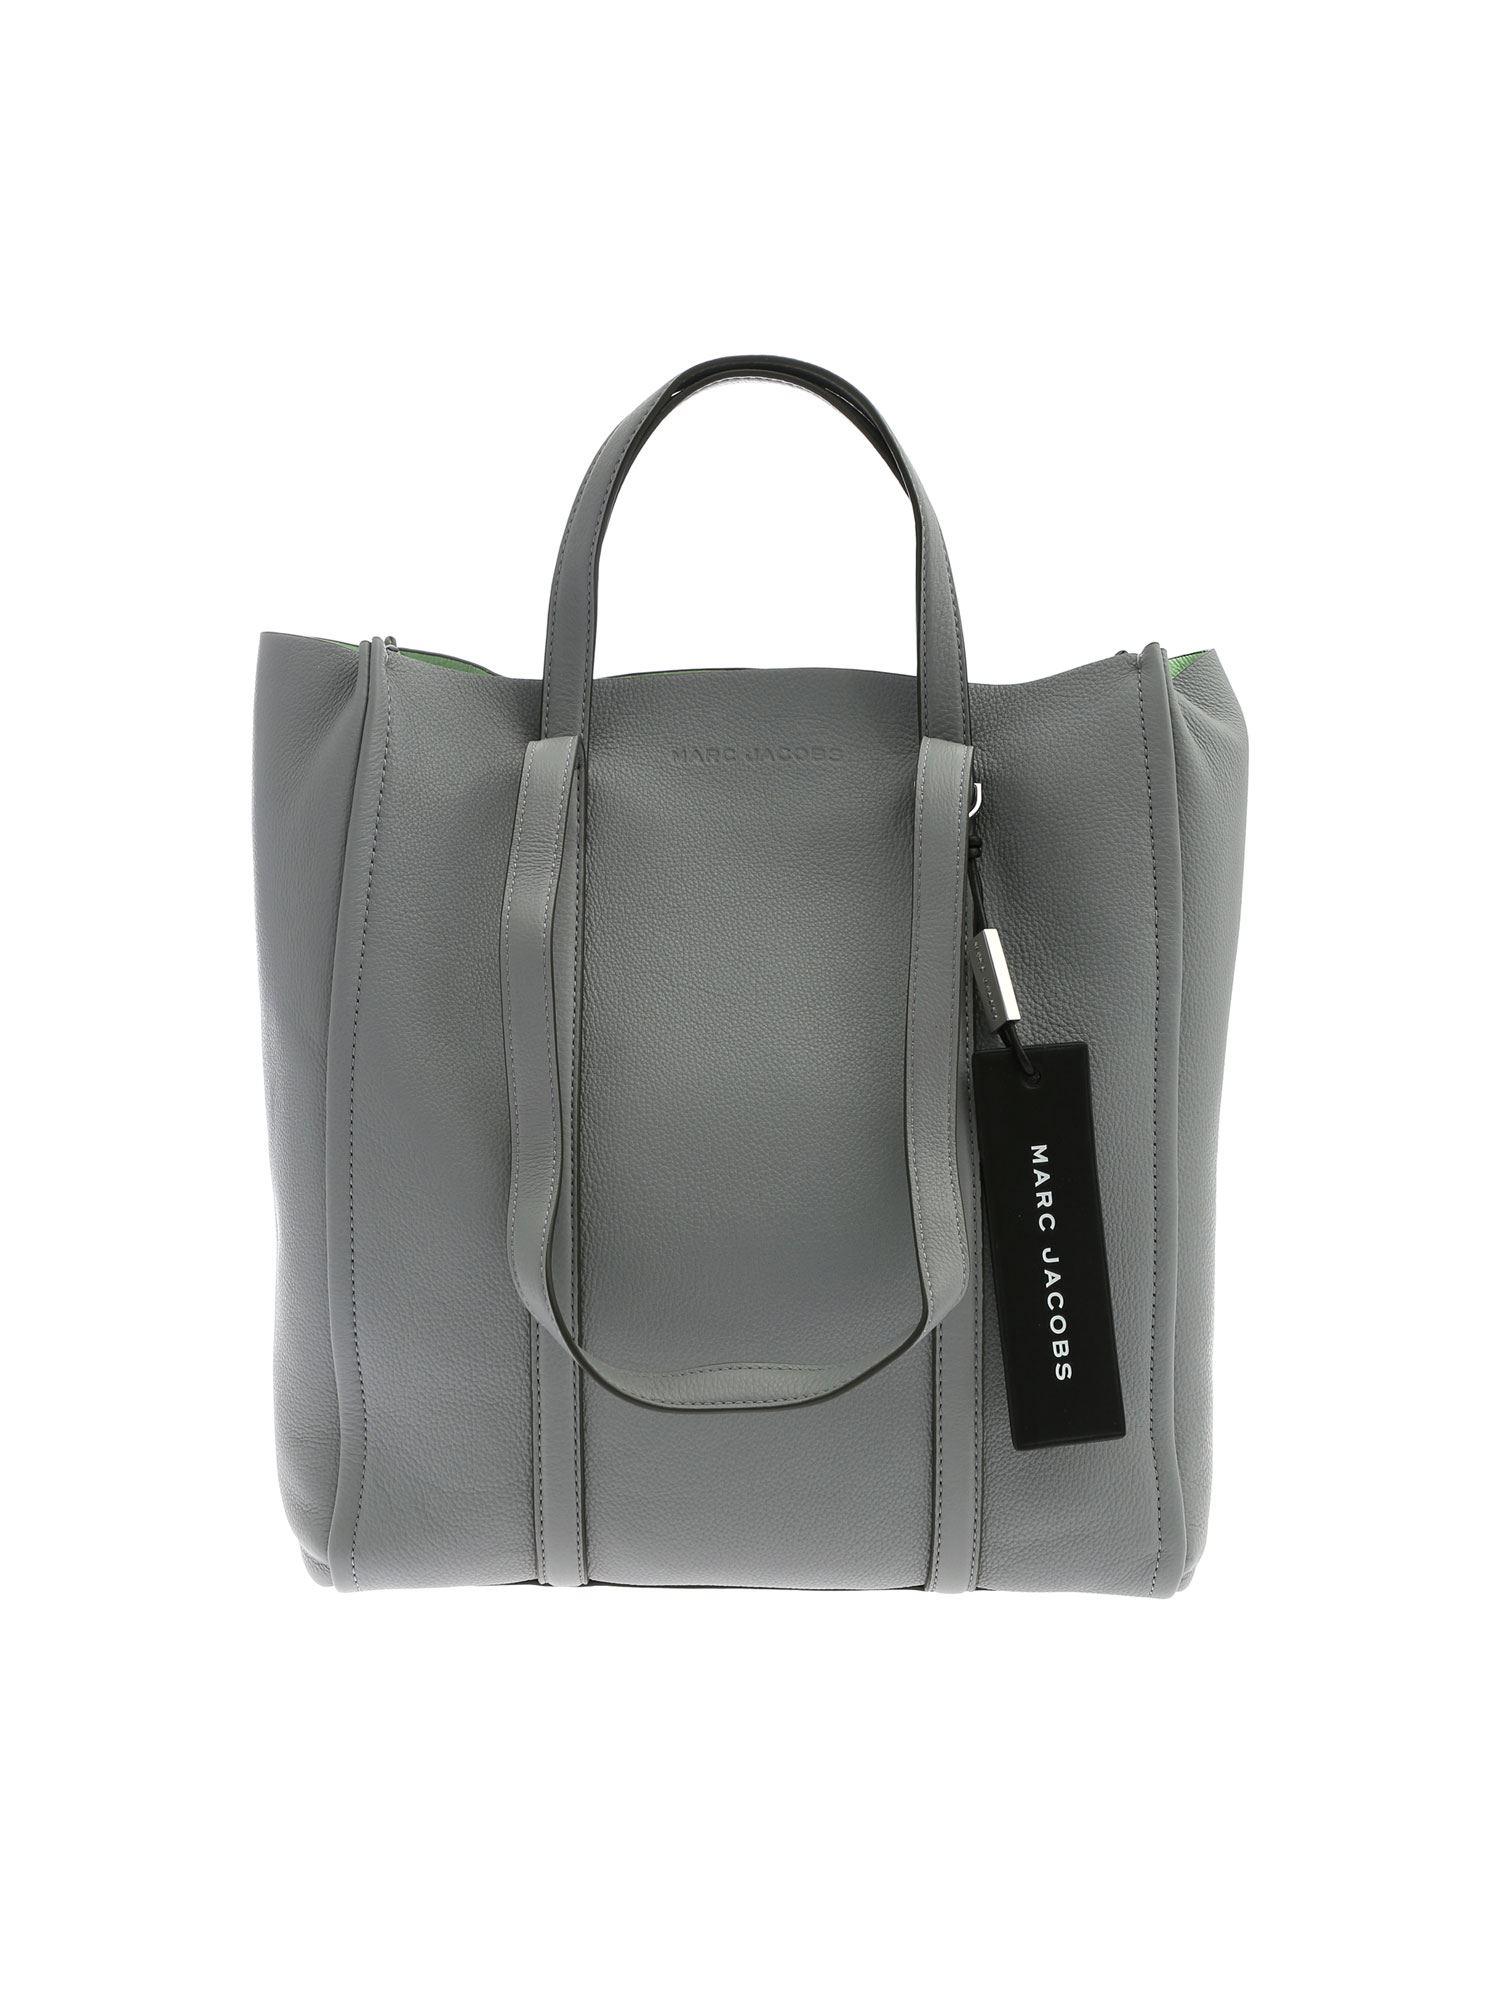 Marc Jacobs Tag Tote Large Shoulder Bag In Grey in Gray - Lyst